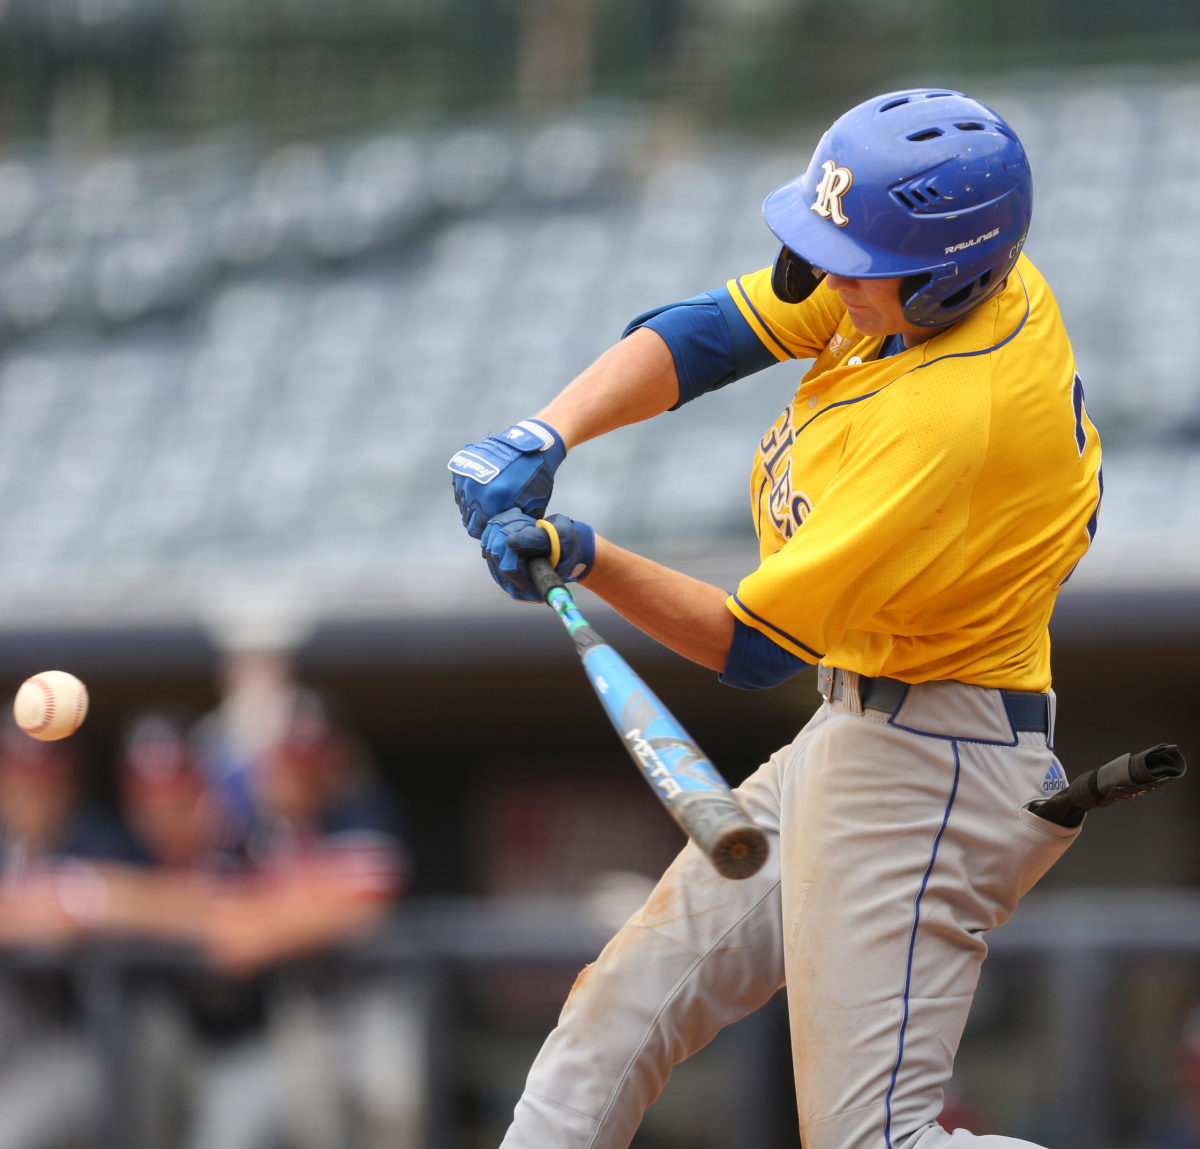 Resurrection's Max Askew (2) swings at a pitch. Tupelo Christian and Resurrection played in game 2 of the MHSAA Class 1A Baseball Championship on Thursday, June 3, 2021 at Trustmark Park. Photo by Keith Warren